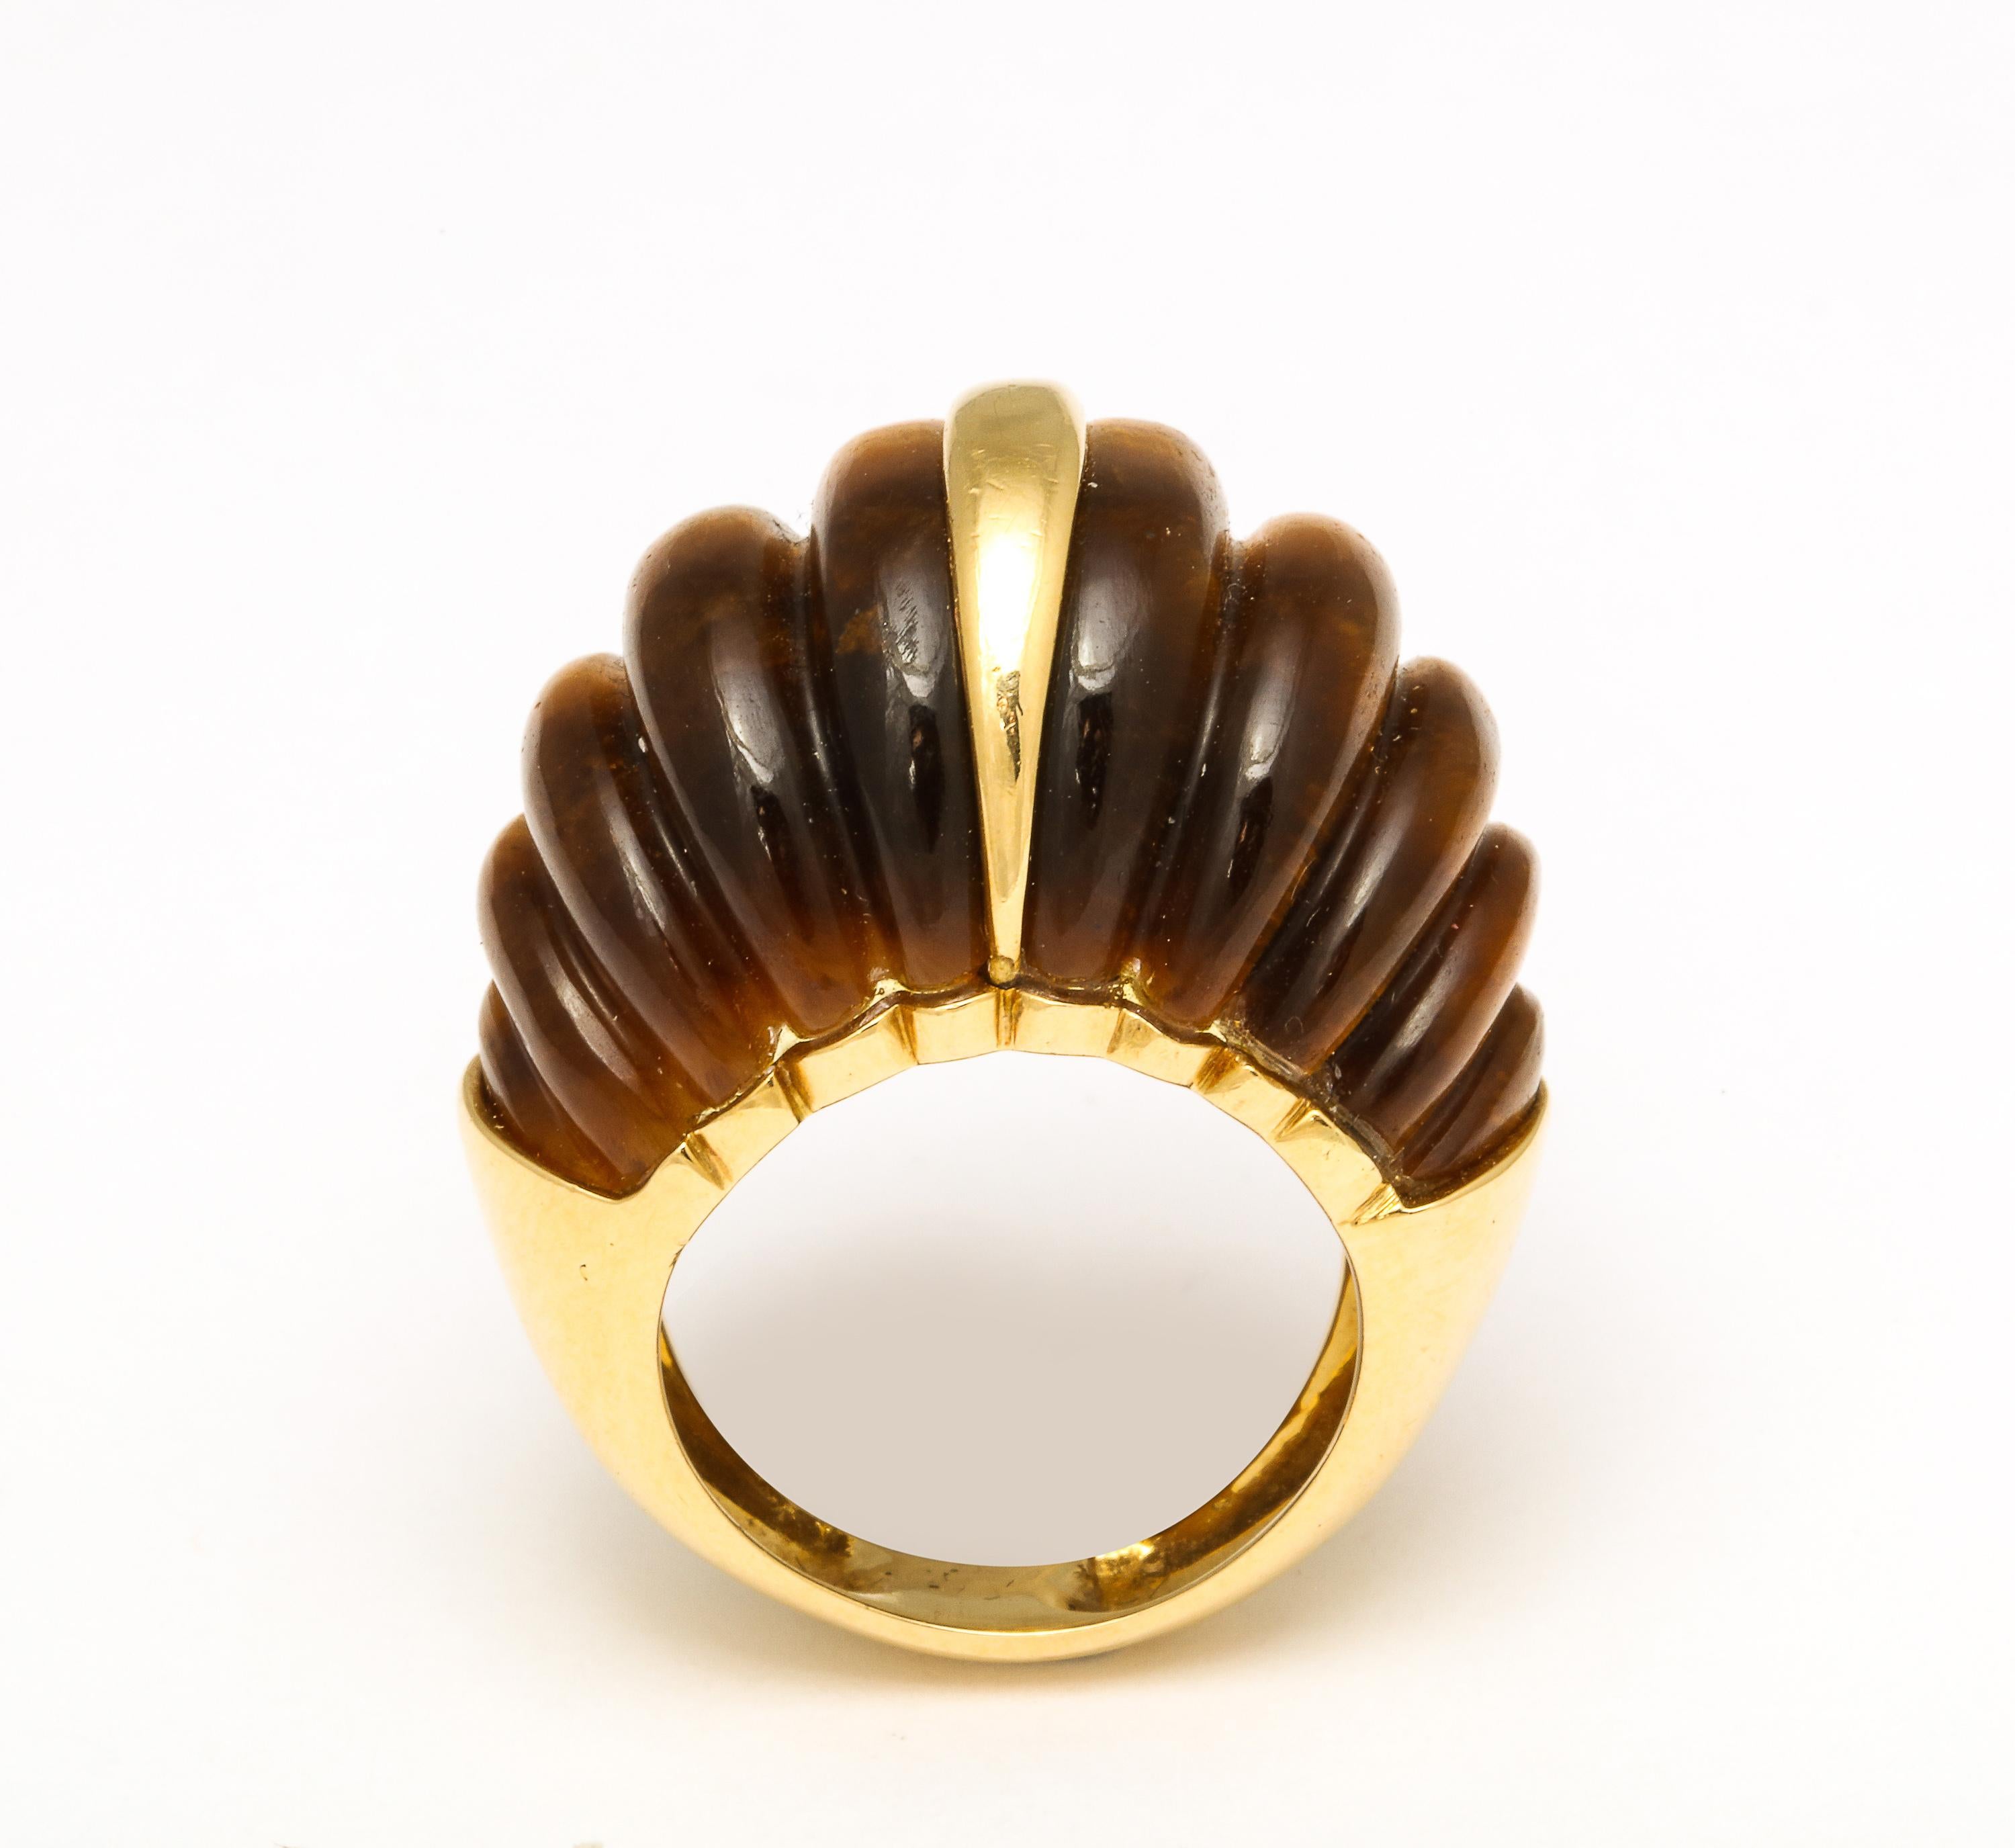 Tiger's Eye Melon Shaped Ring with Center Gold Bar For Sale 1